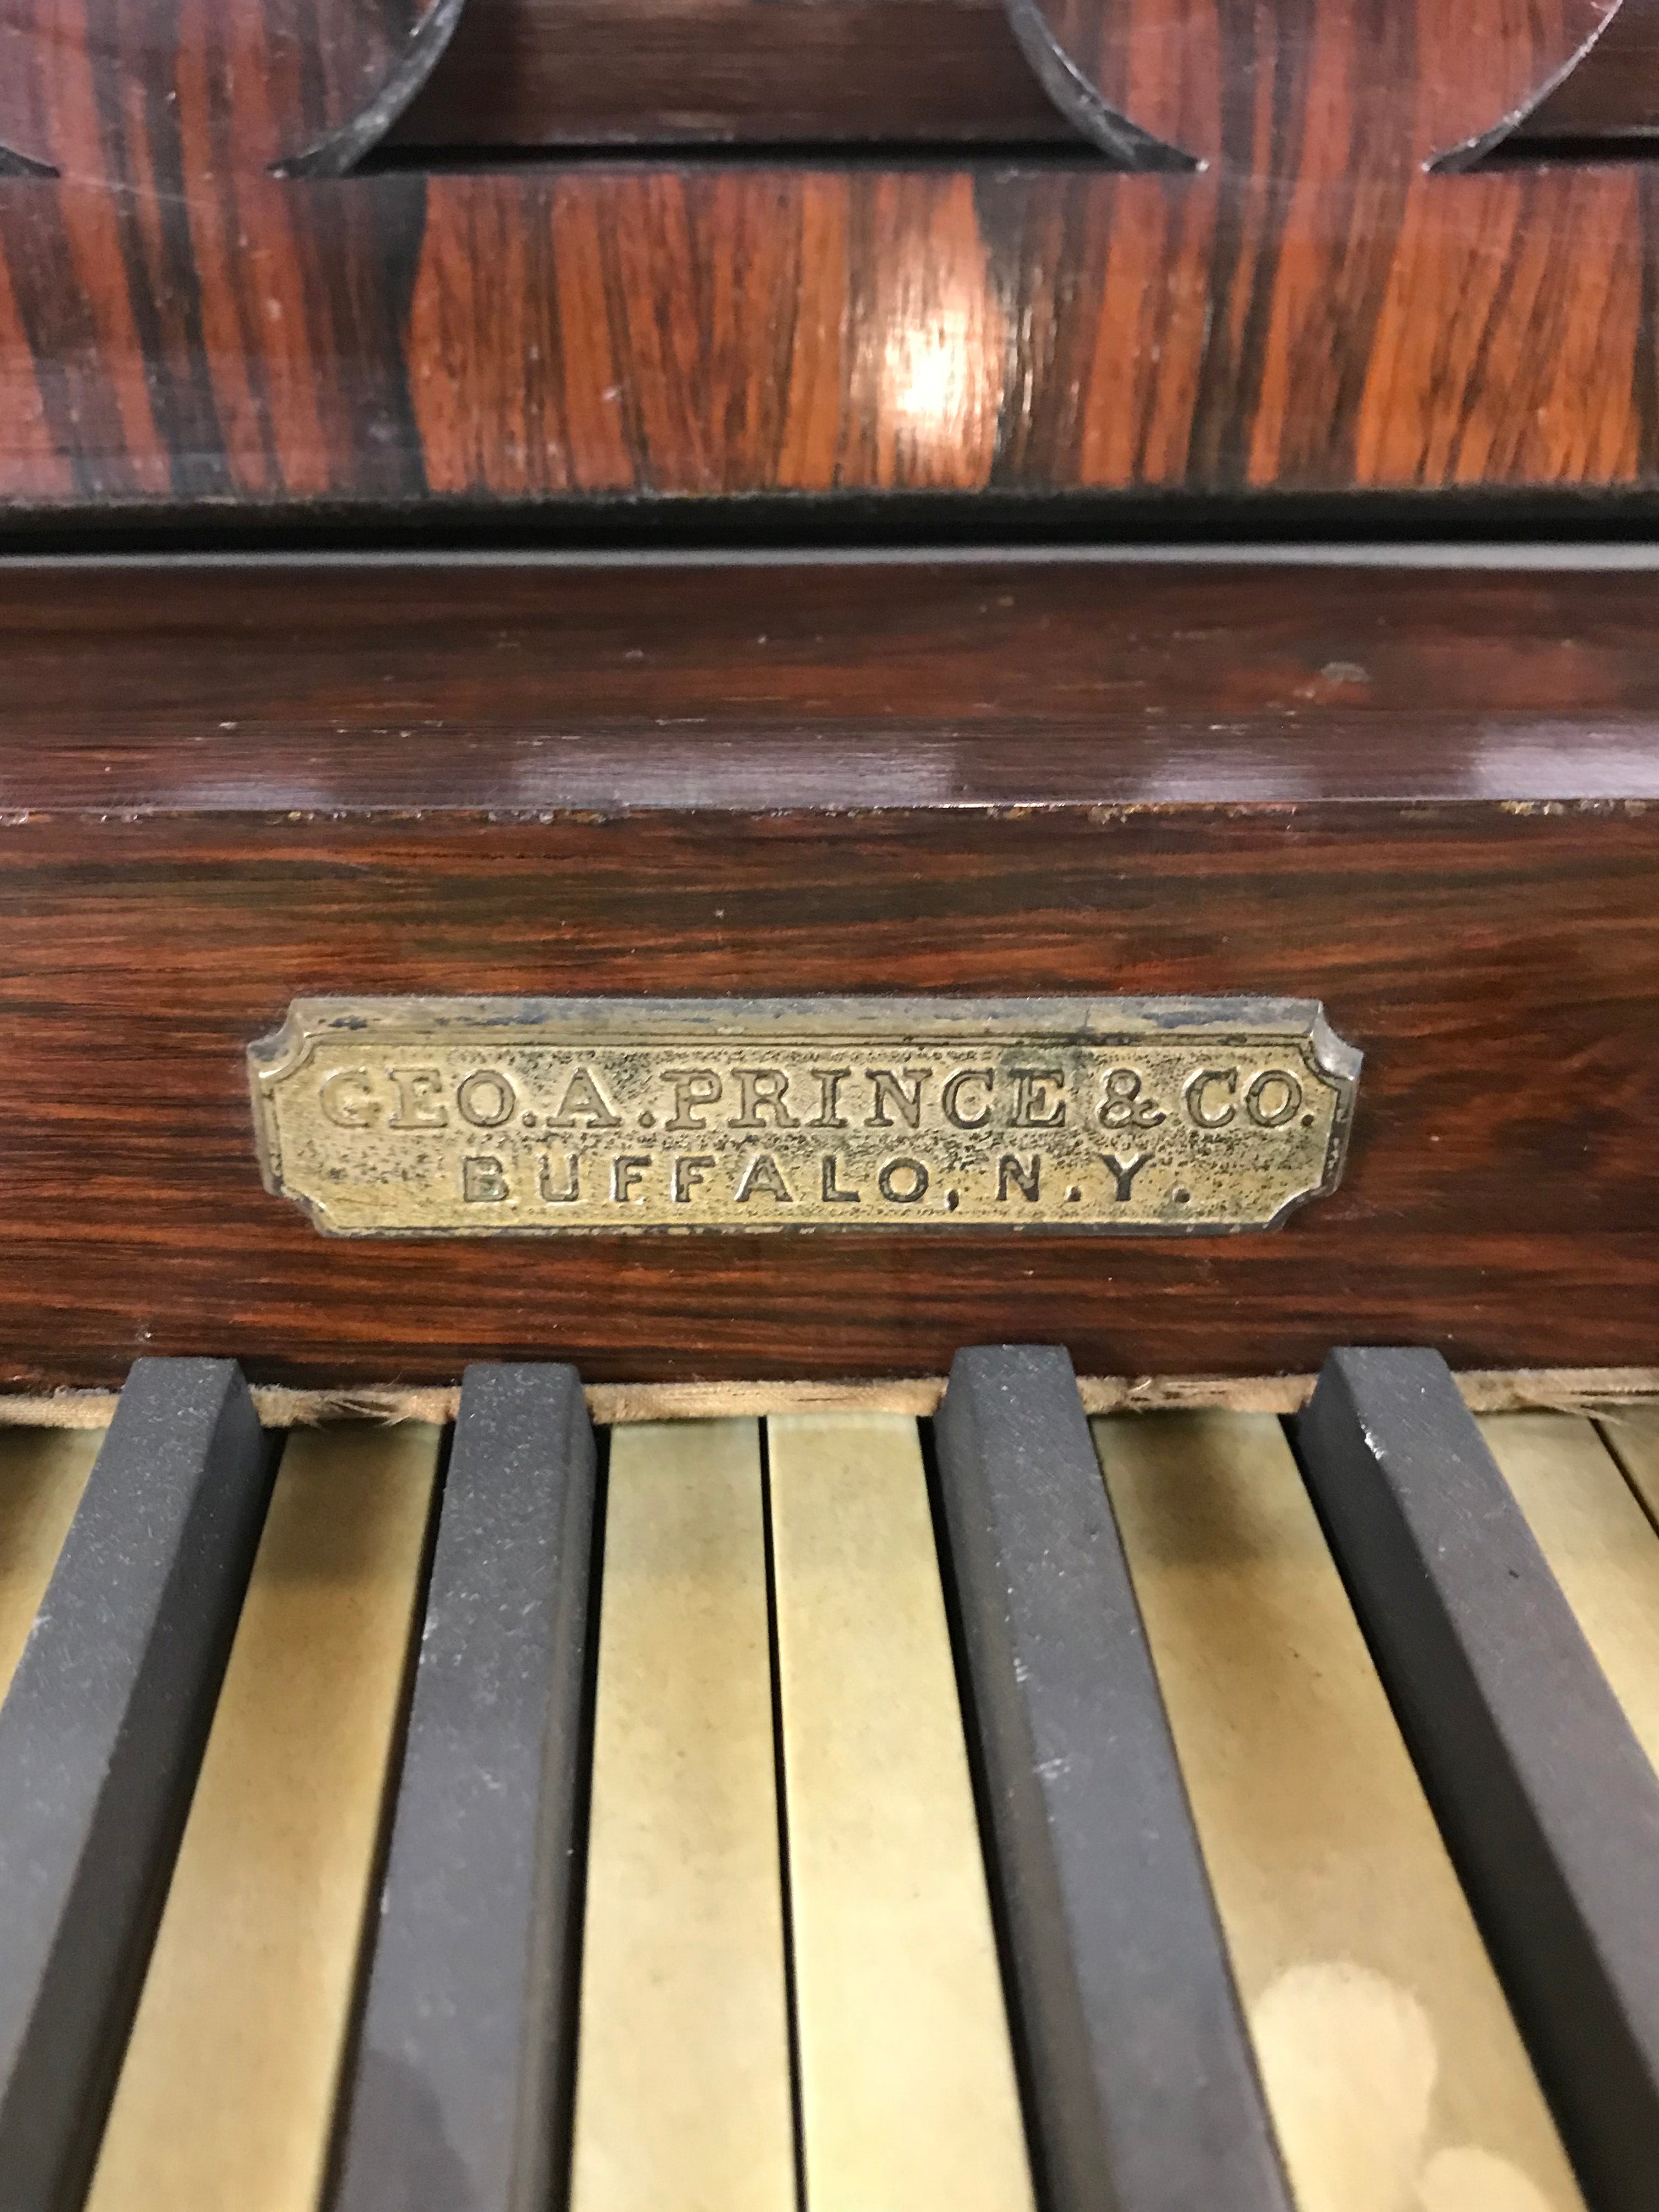 Geo A. Prince & Co. Antique Melodeon